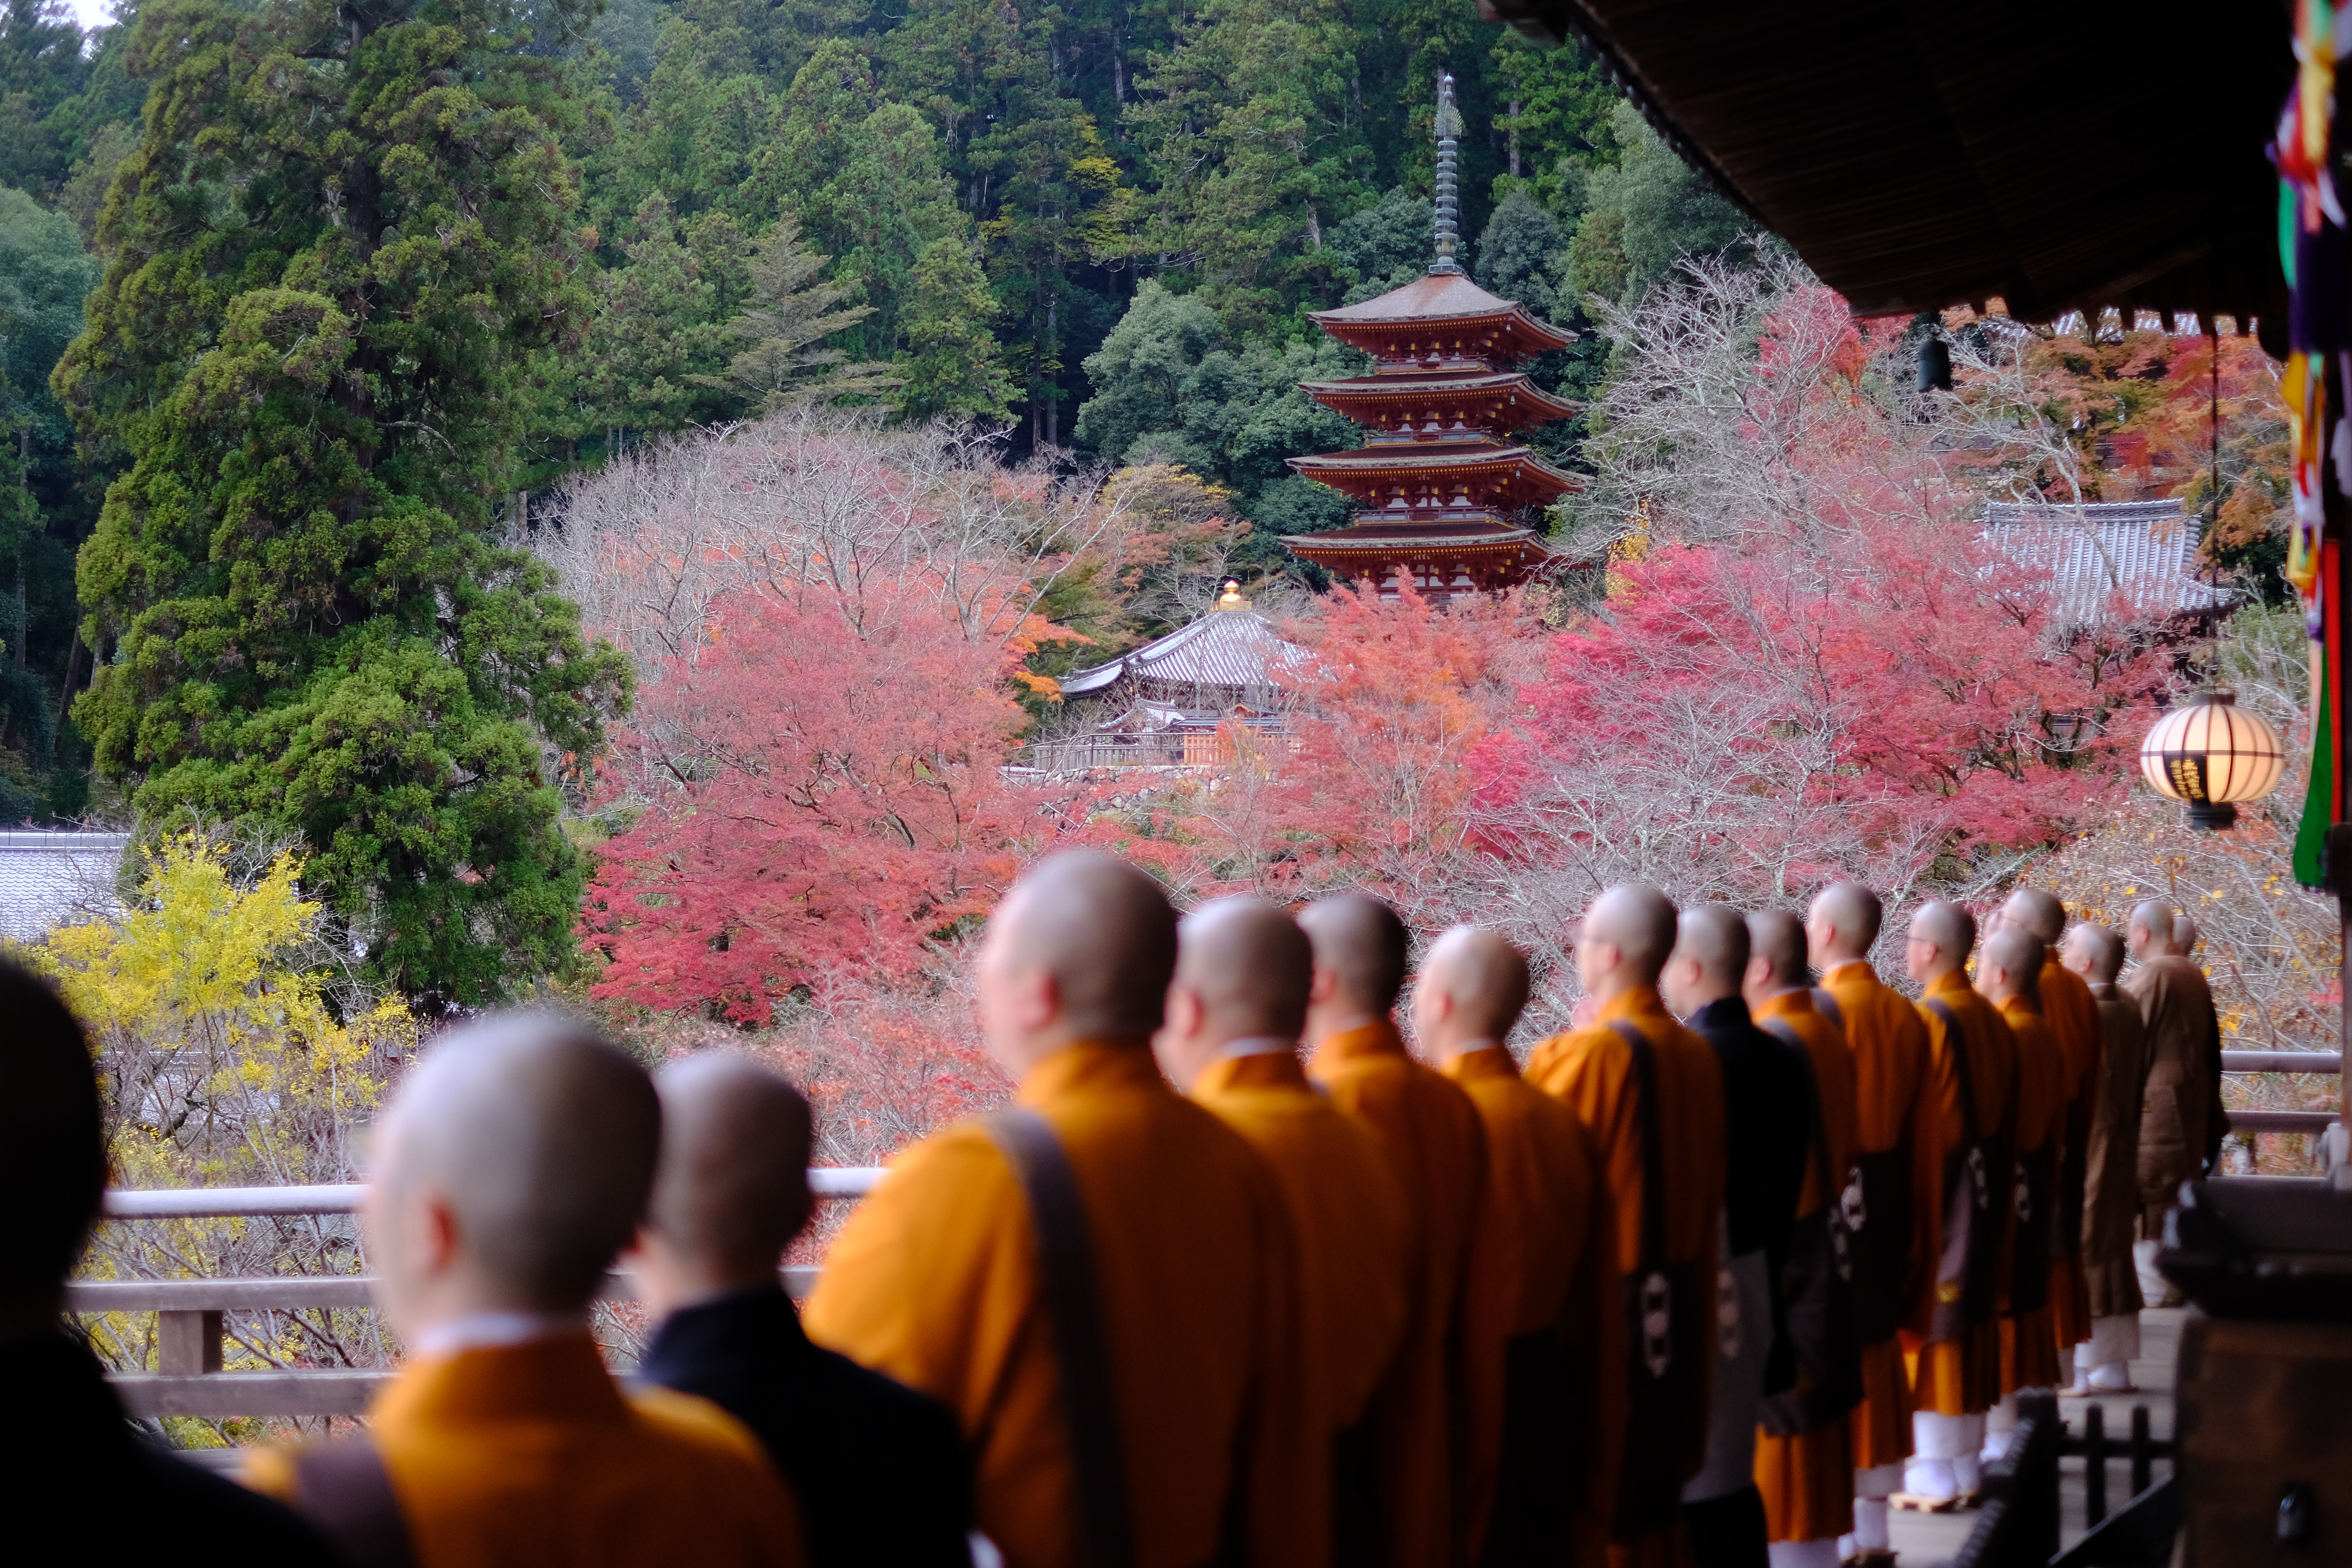 Reset your mind and body in the hidden gems of Hase-dera temple